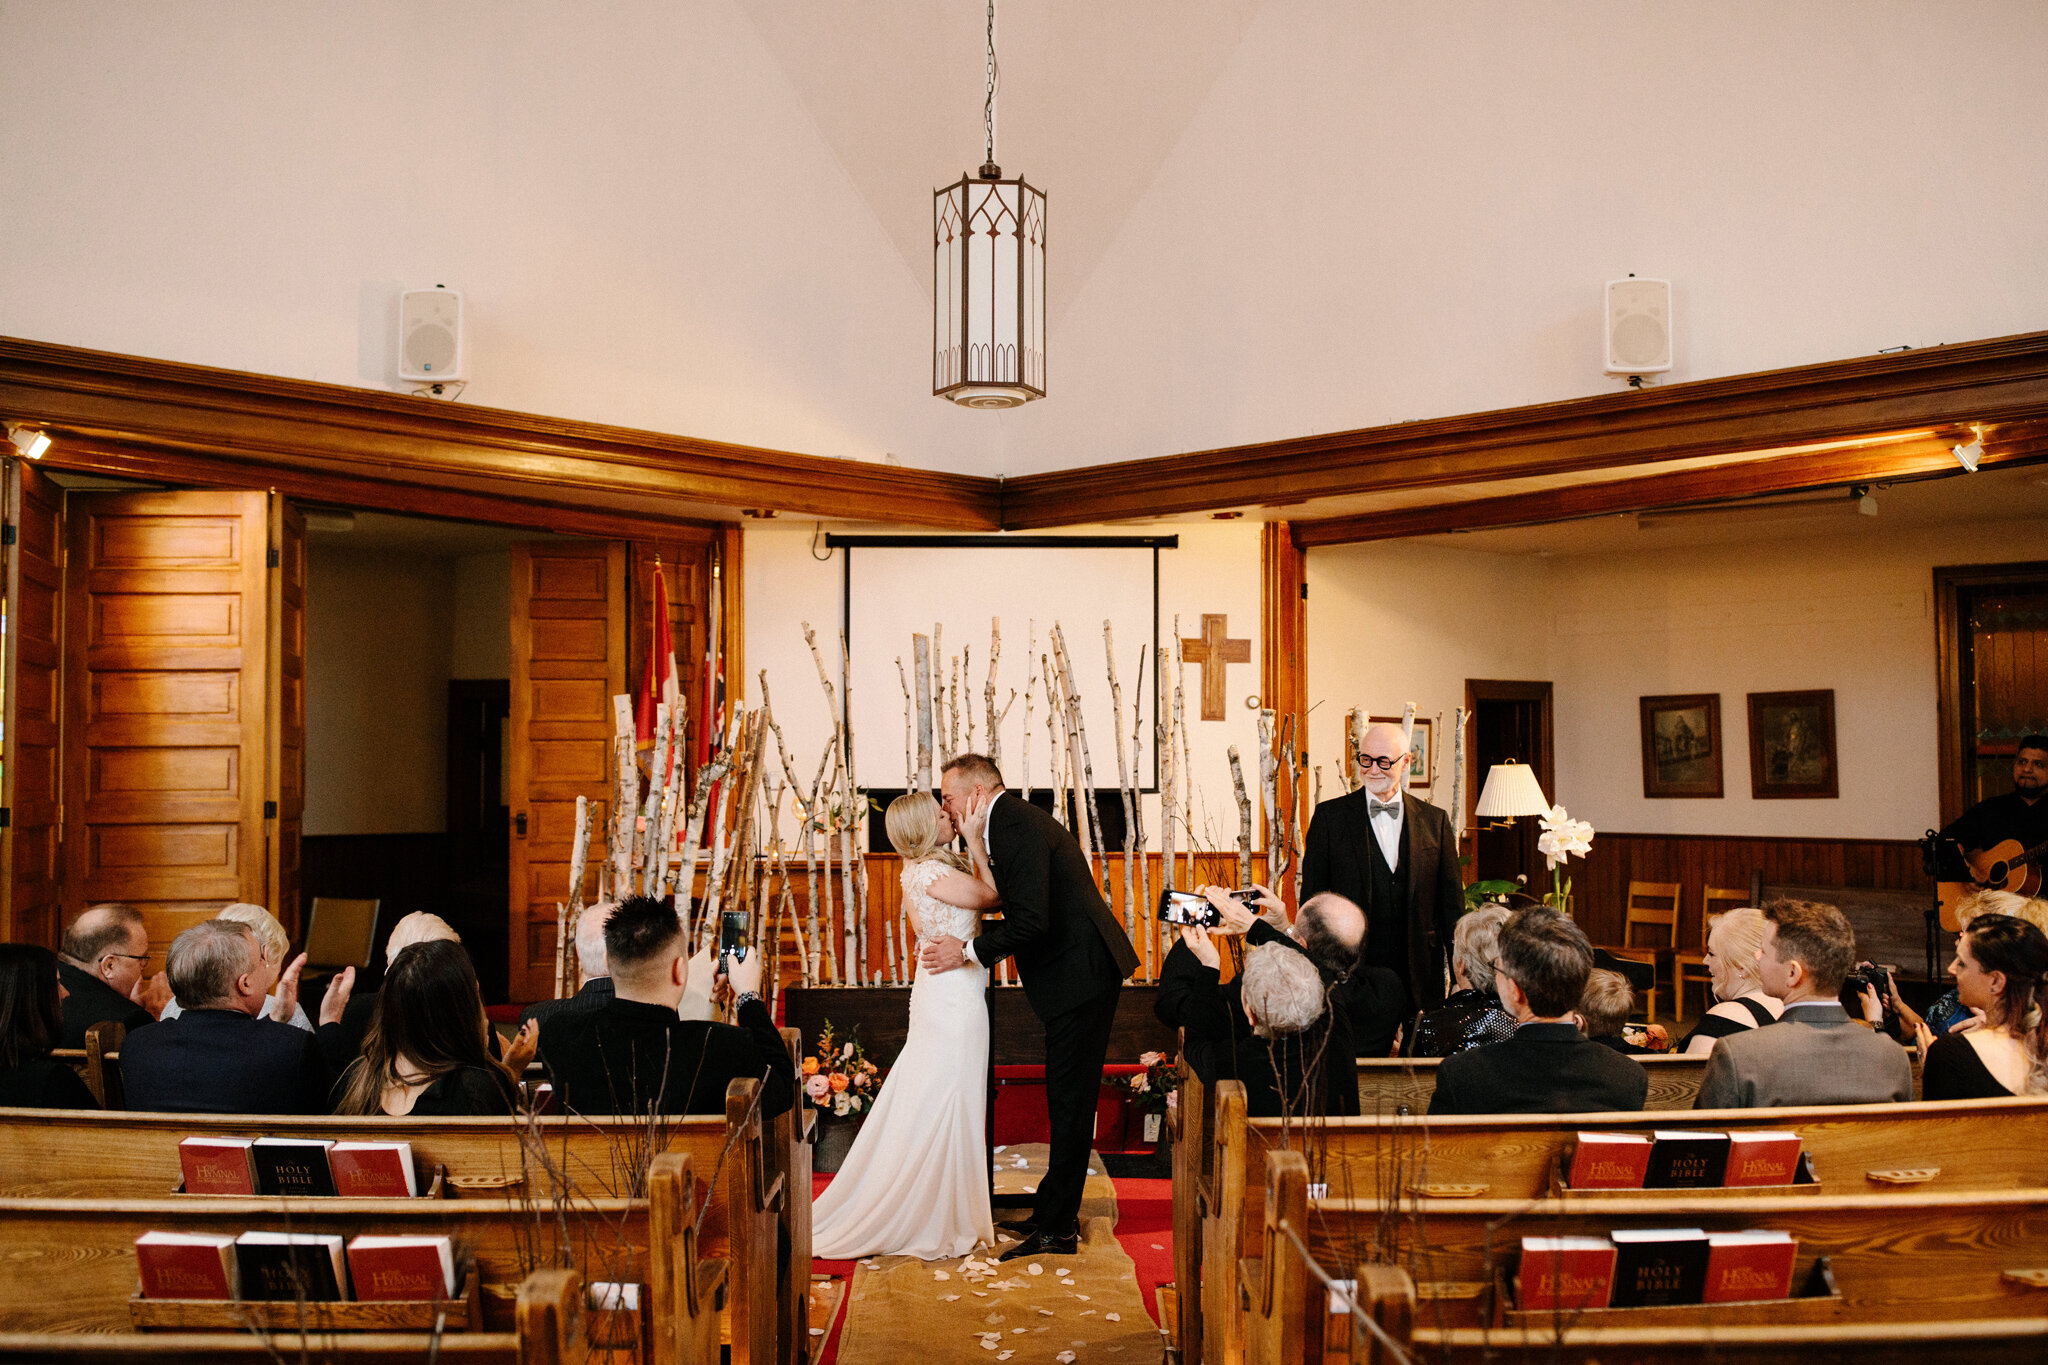 First kiss in church at intimate winter wedding